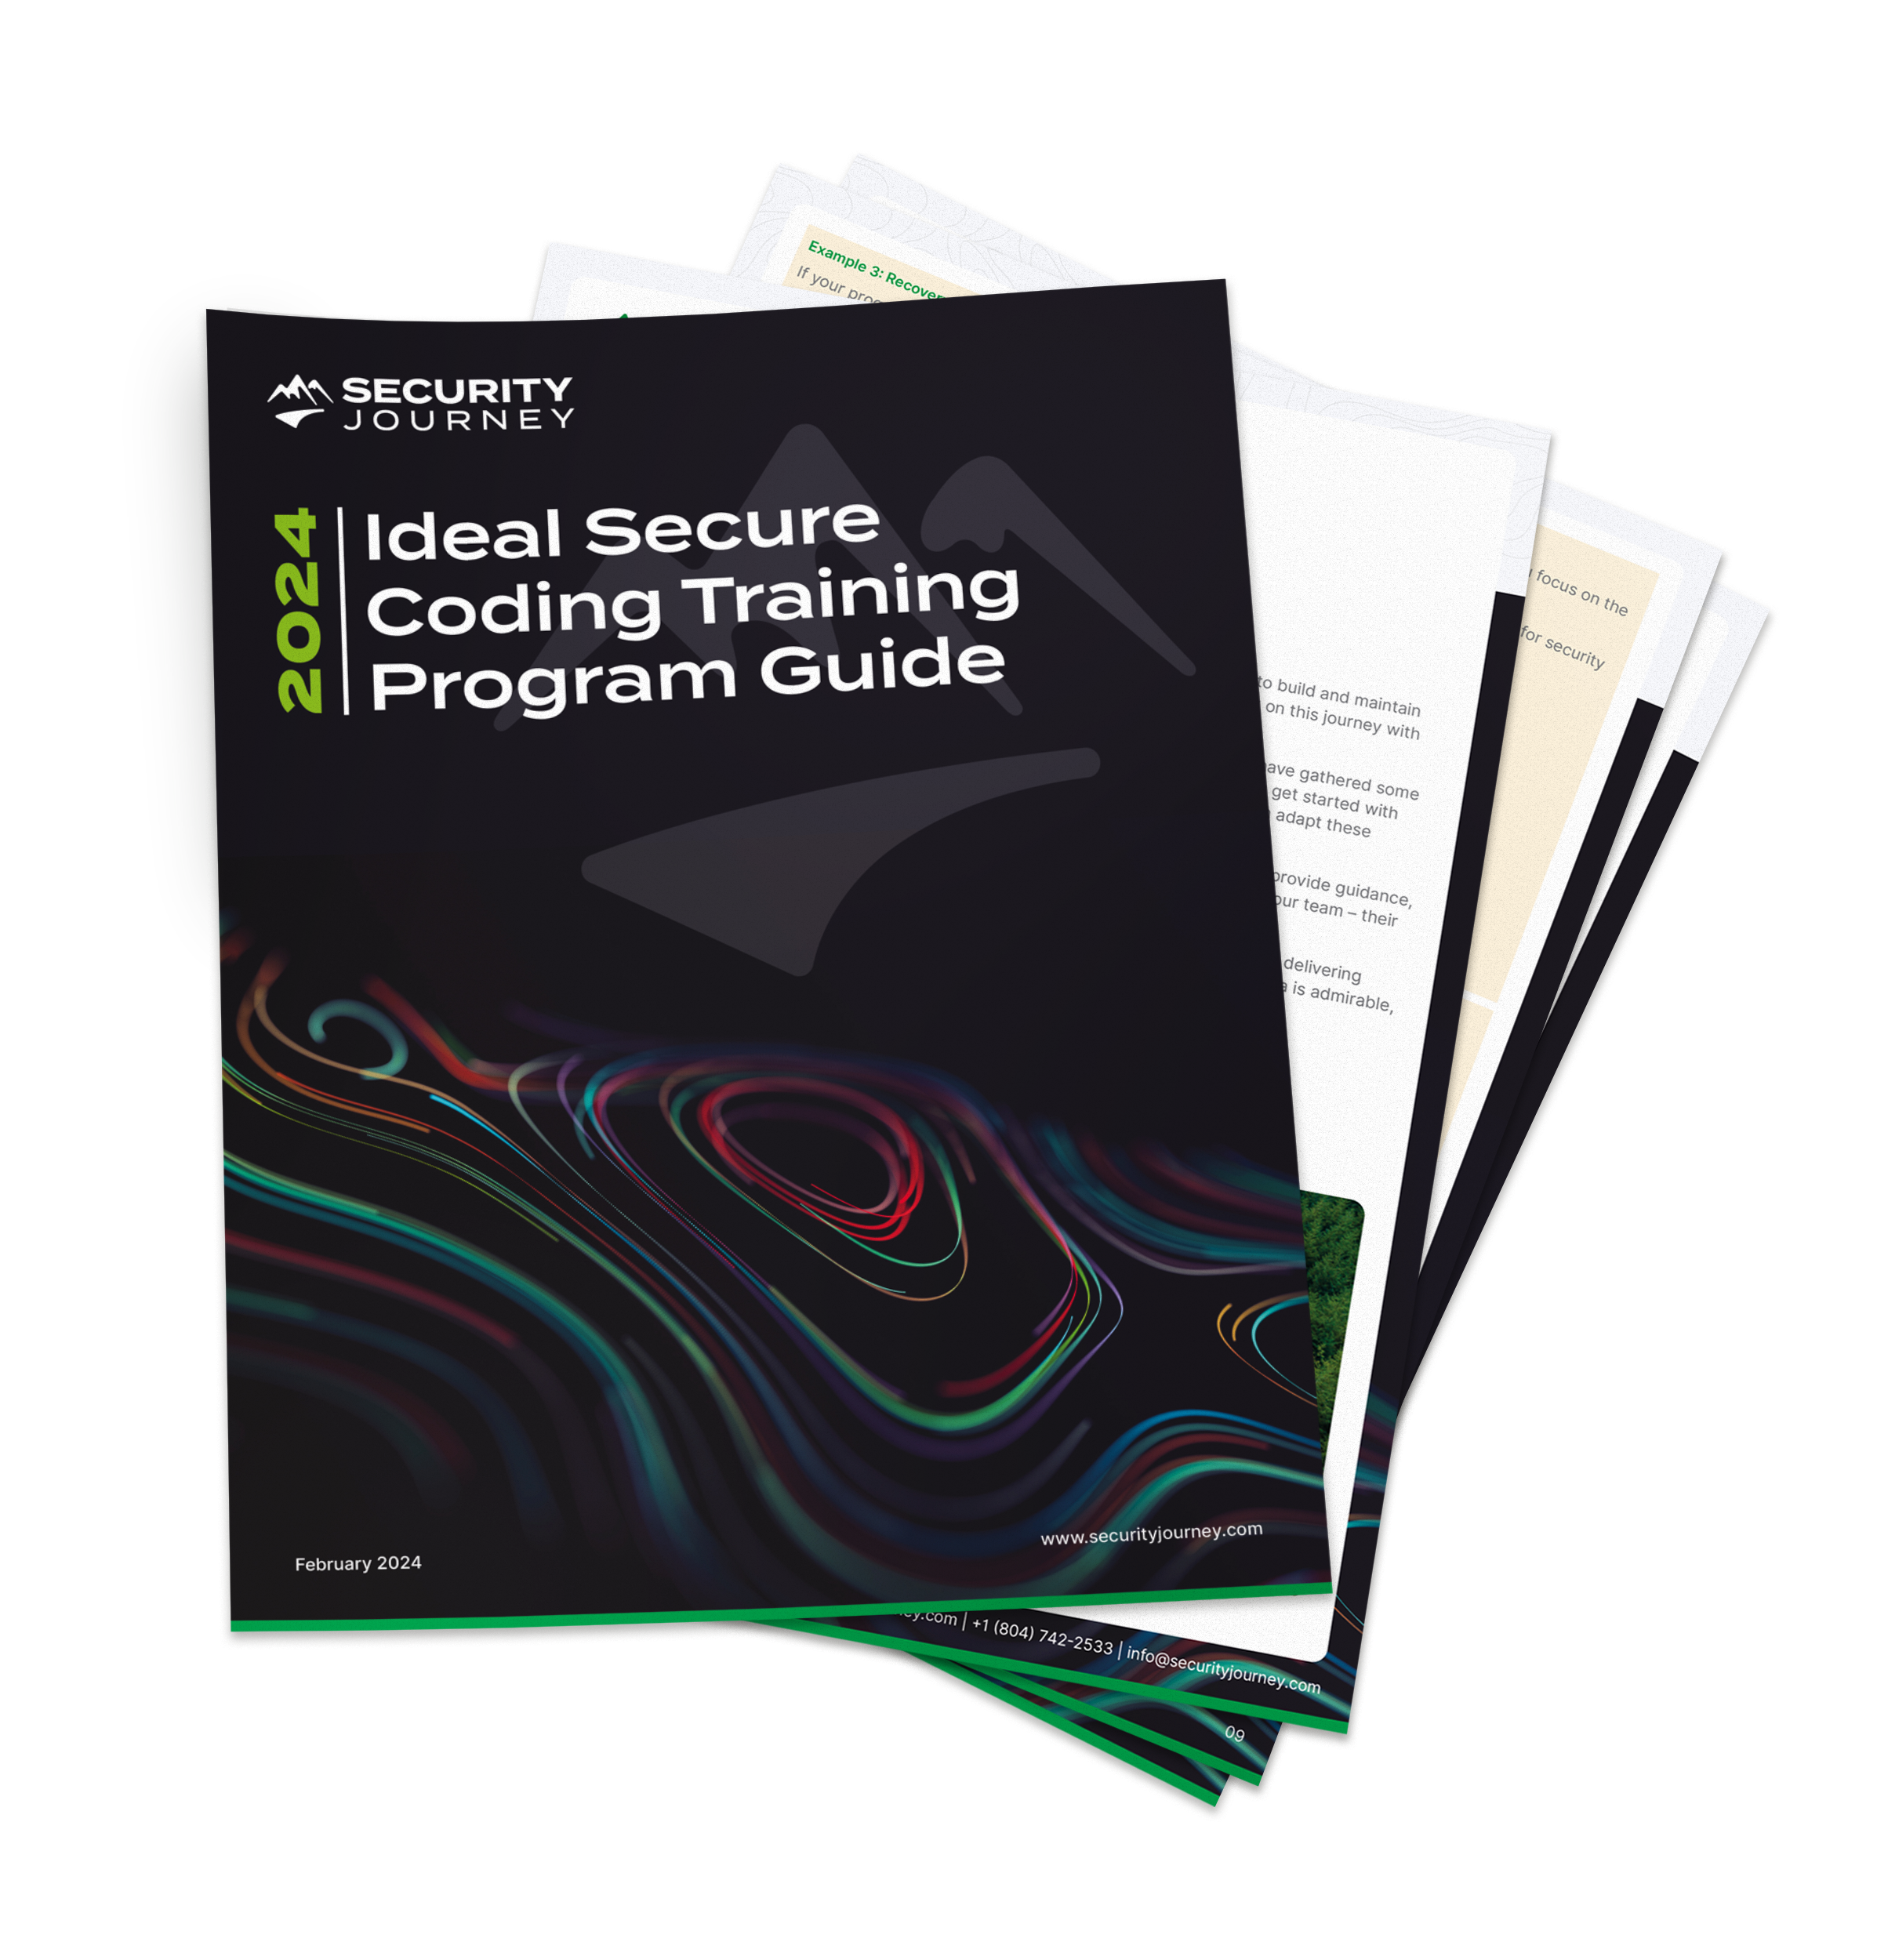 Ideal Secure Coding Training Program Guide